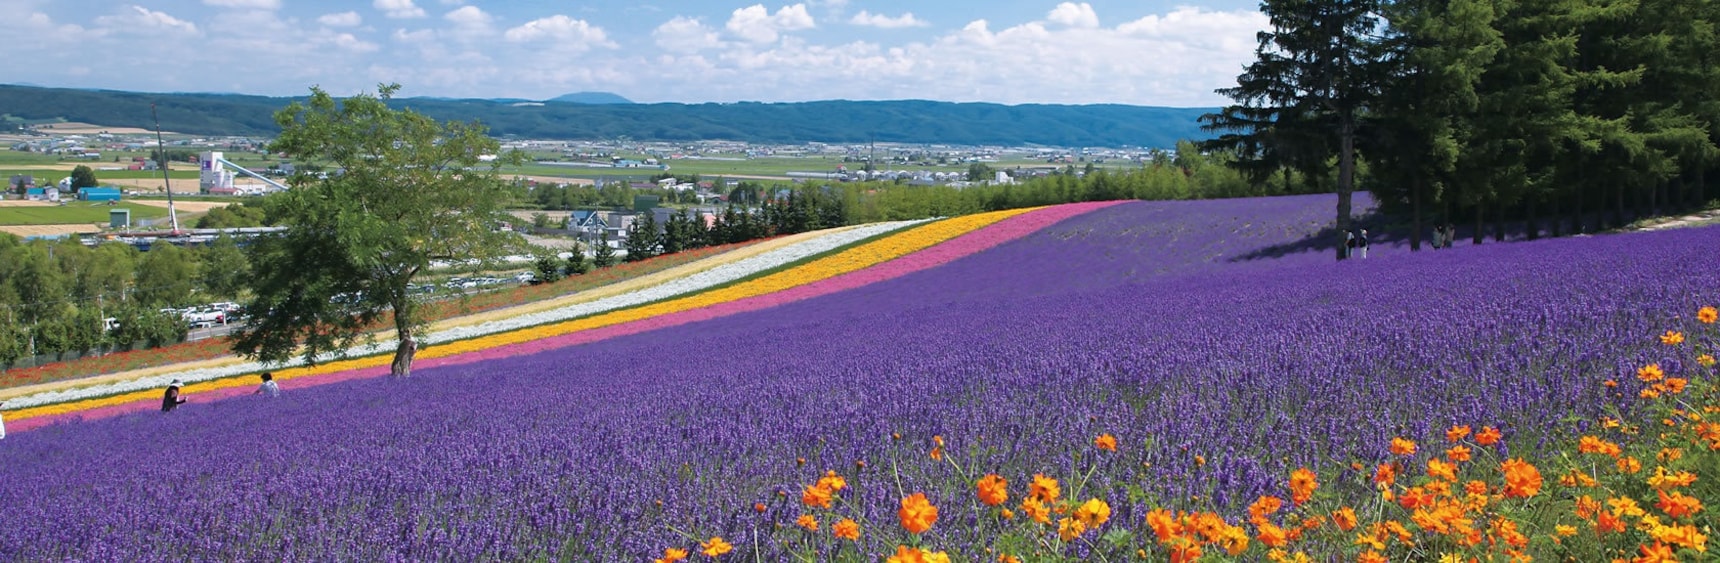 Japan's Top 3 Flower Parks | All About Japan